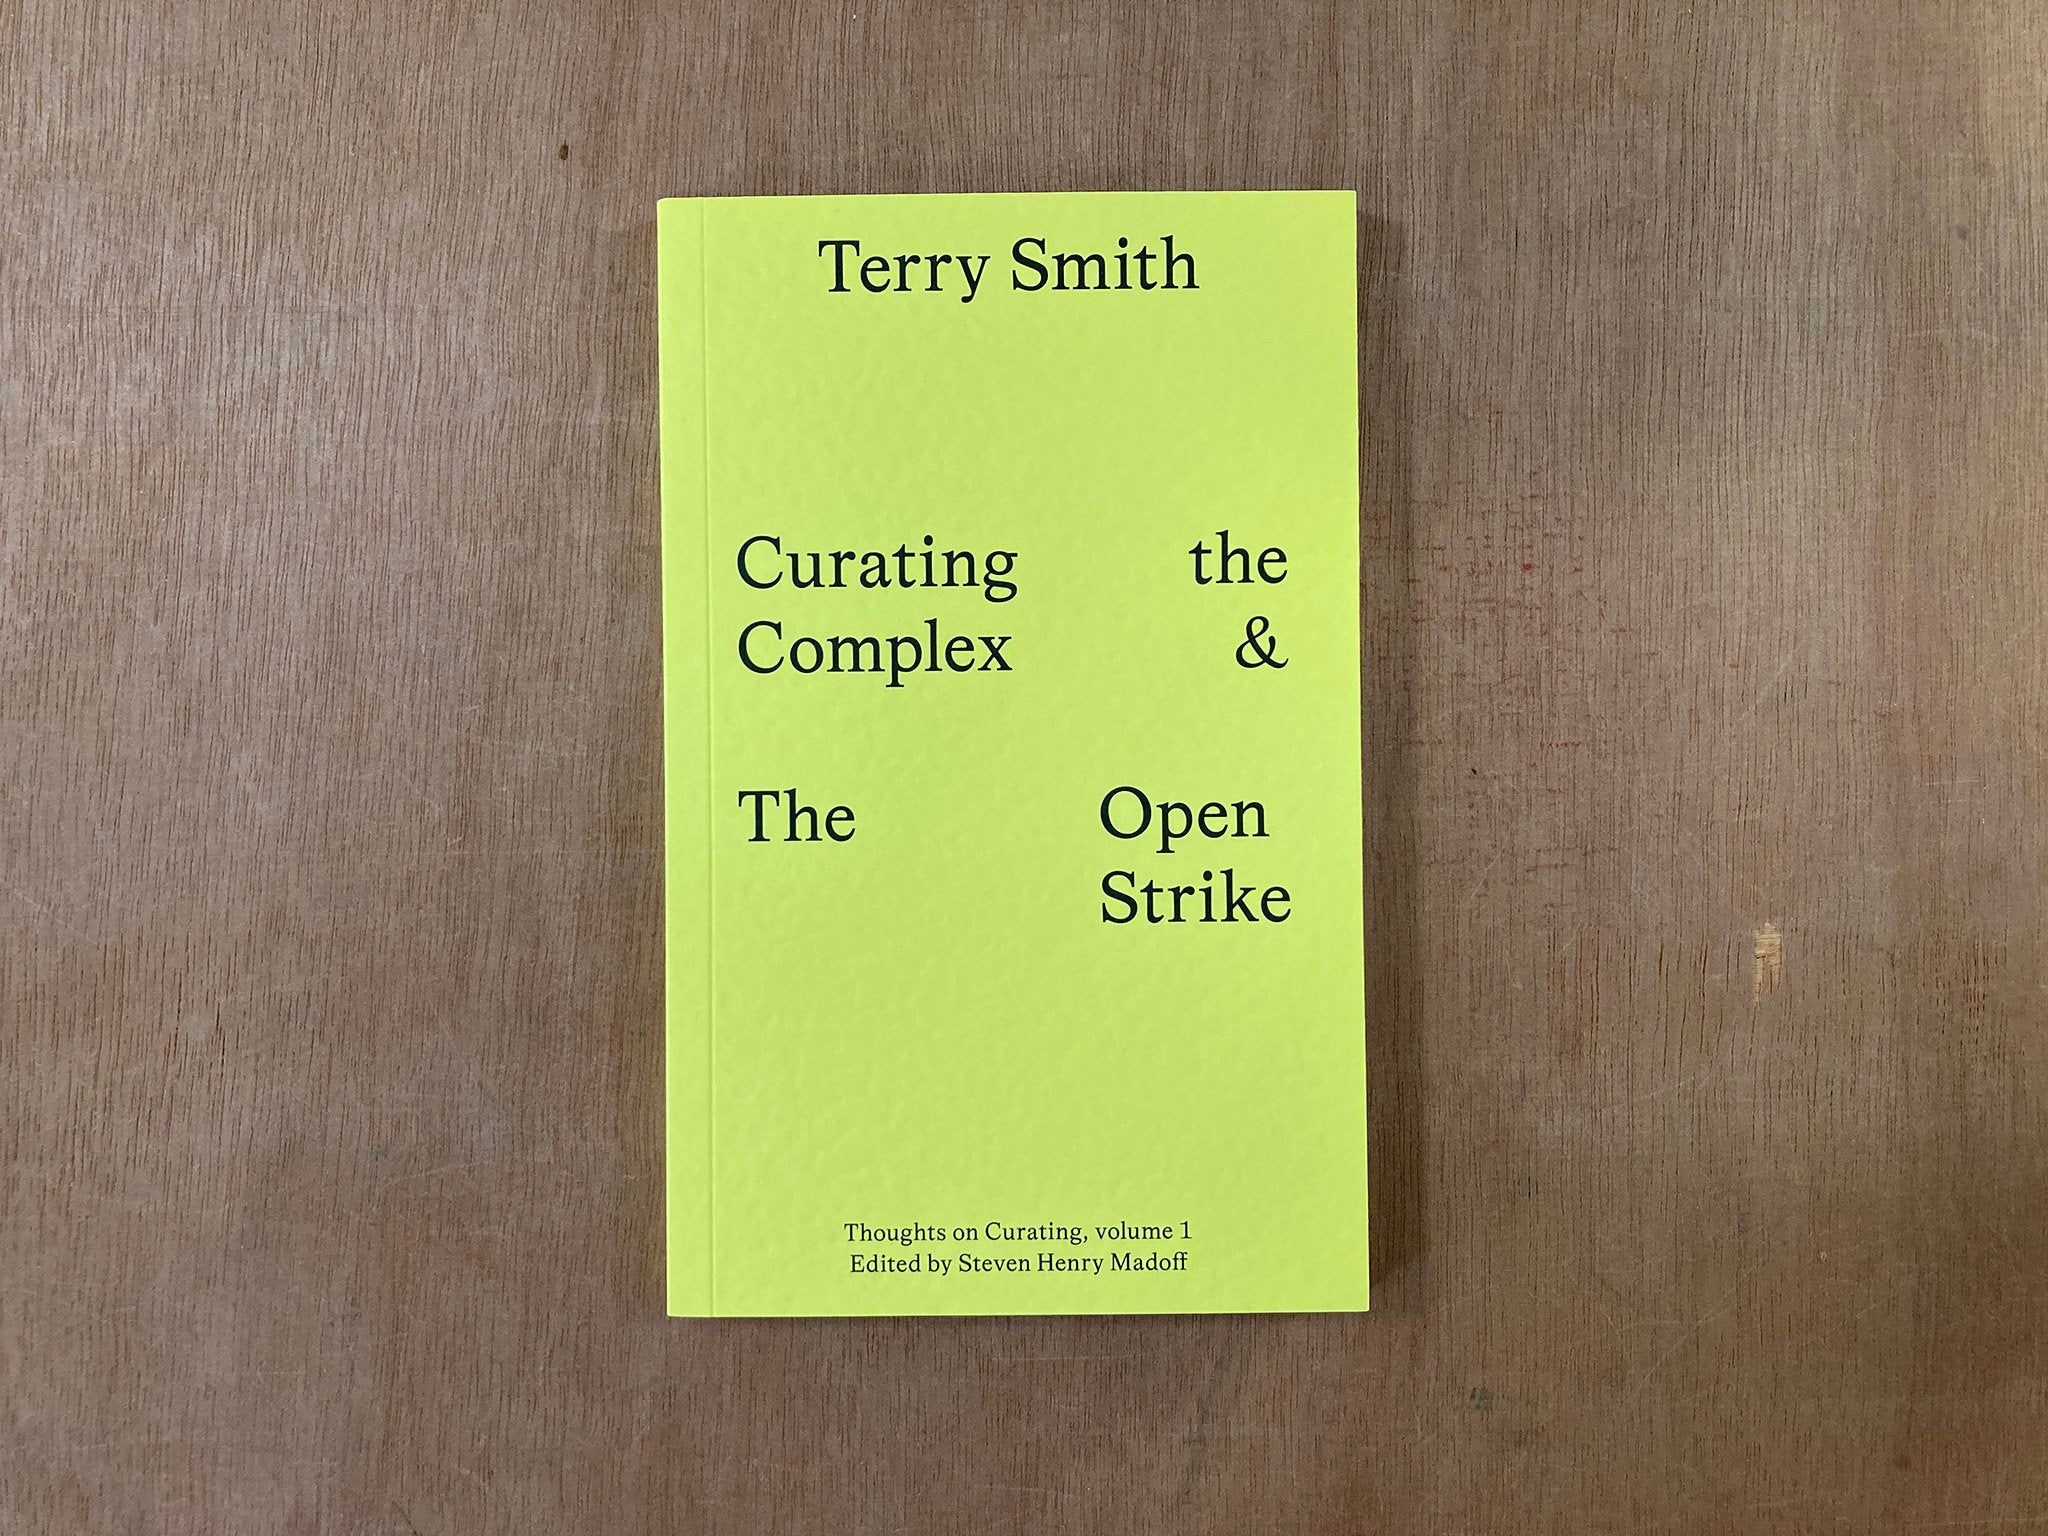 CURATING THE COMPLEX AND THE OPEN STRIKE by Terry Smith